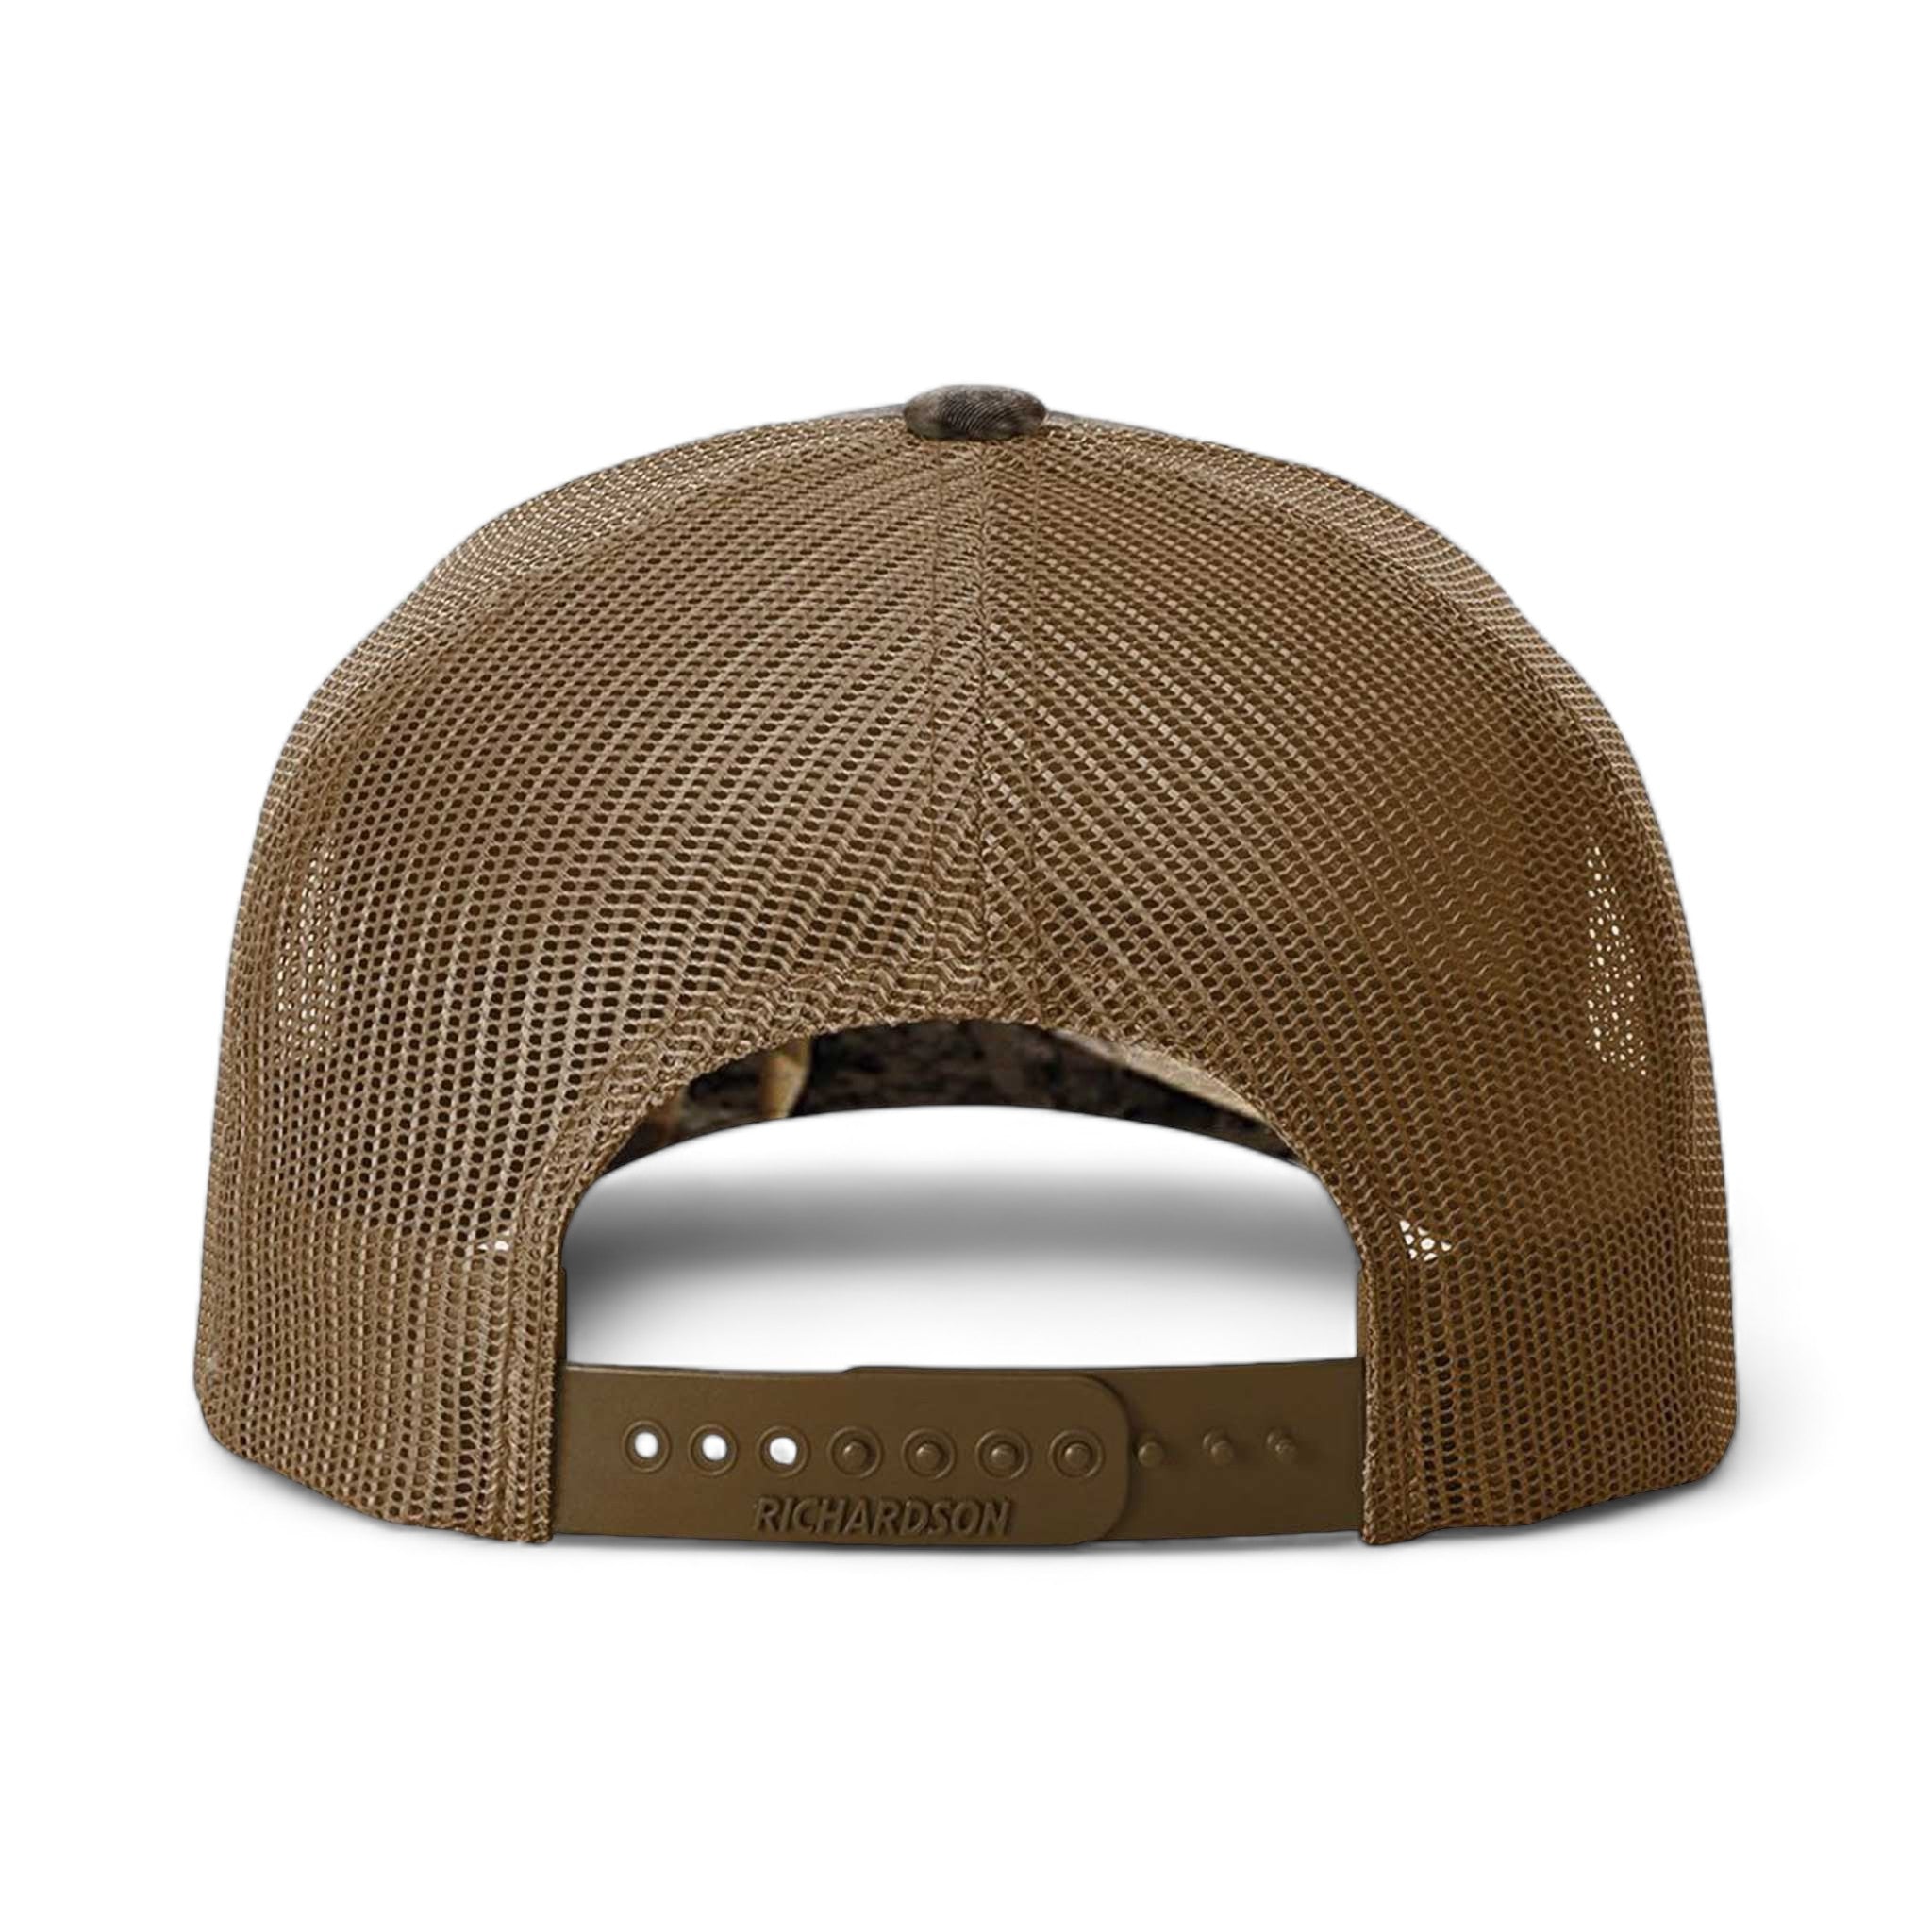 Back view of Richardson 112PFP custom hat in realtree max-7 and buck